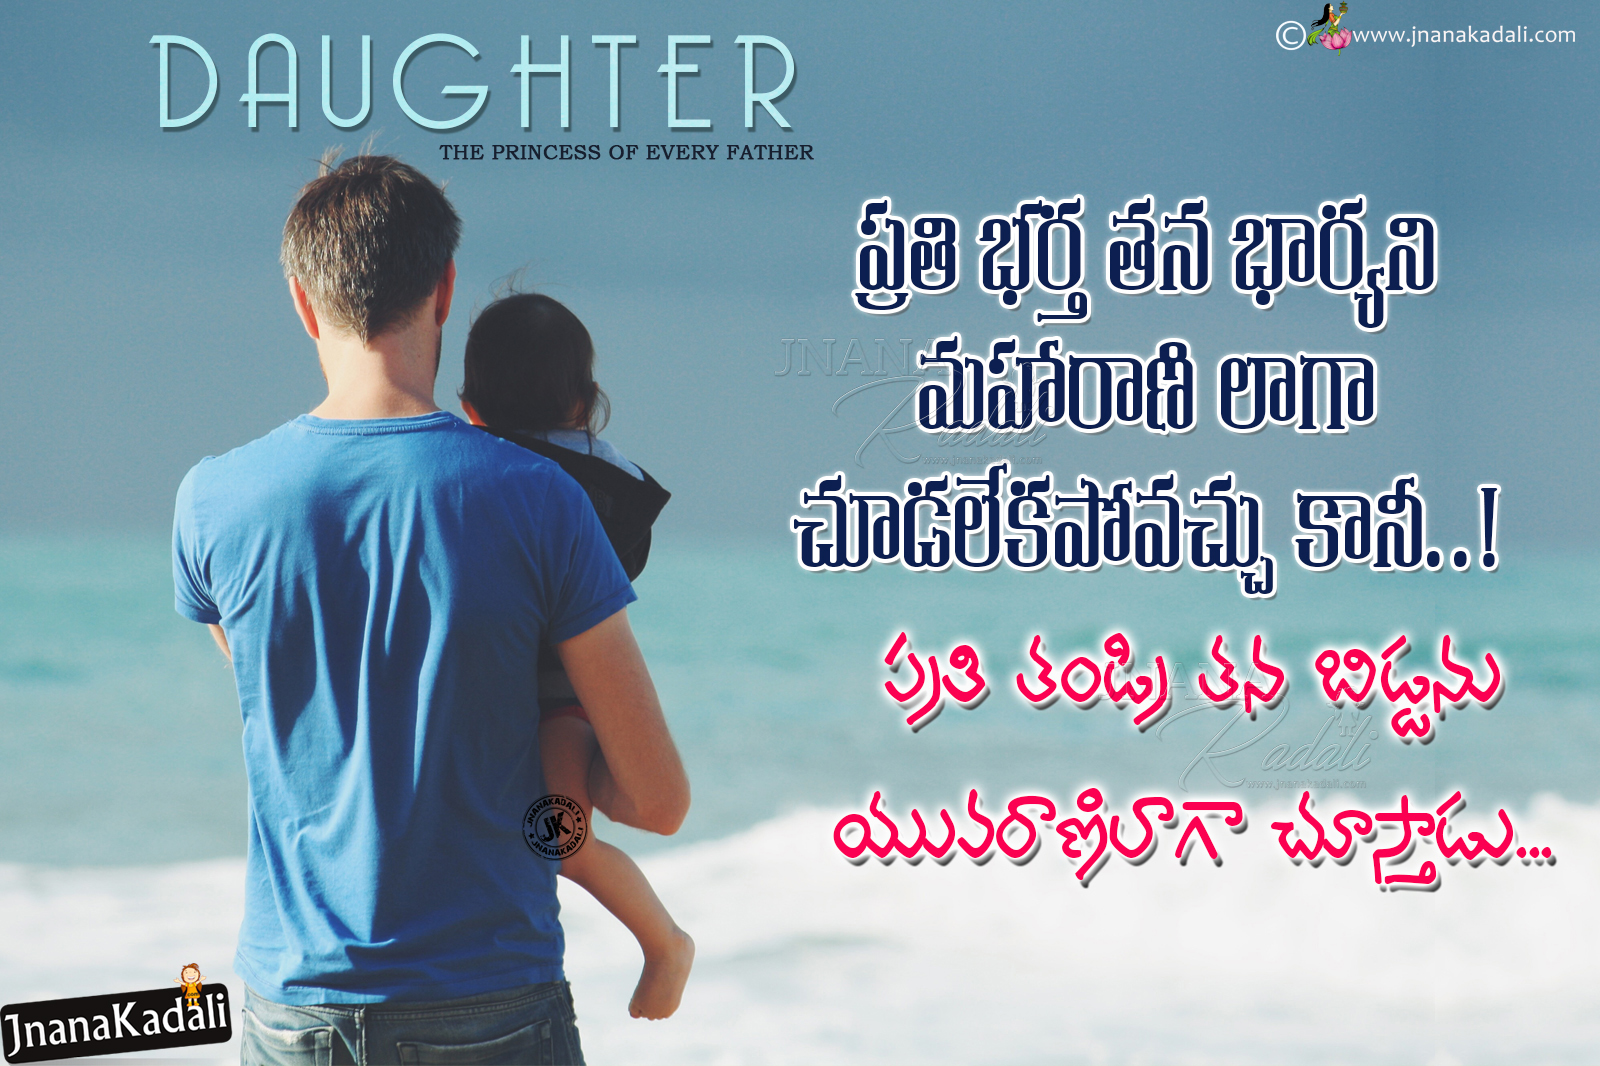 Heart Touching Father Greatness Quotes Hd Wallpapers Father Greatness Hd Wallpapers With Telugu Quotes Brainysms